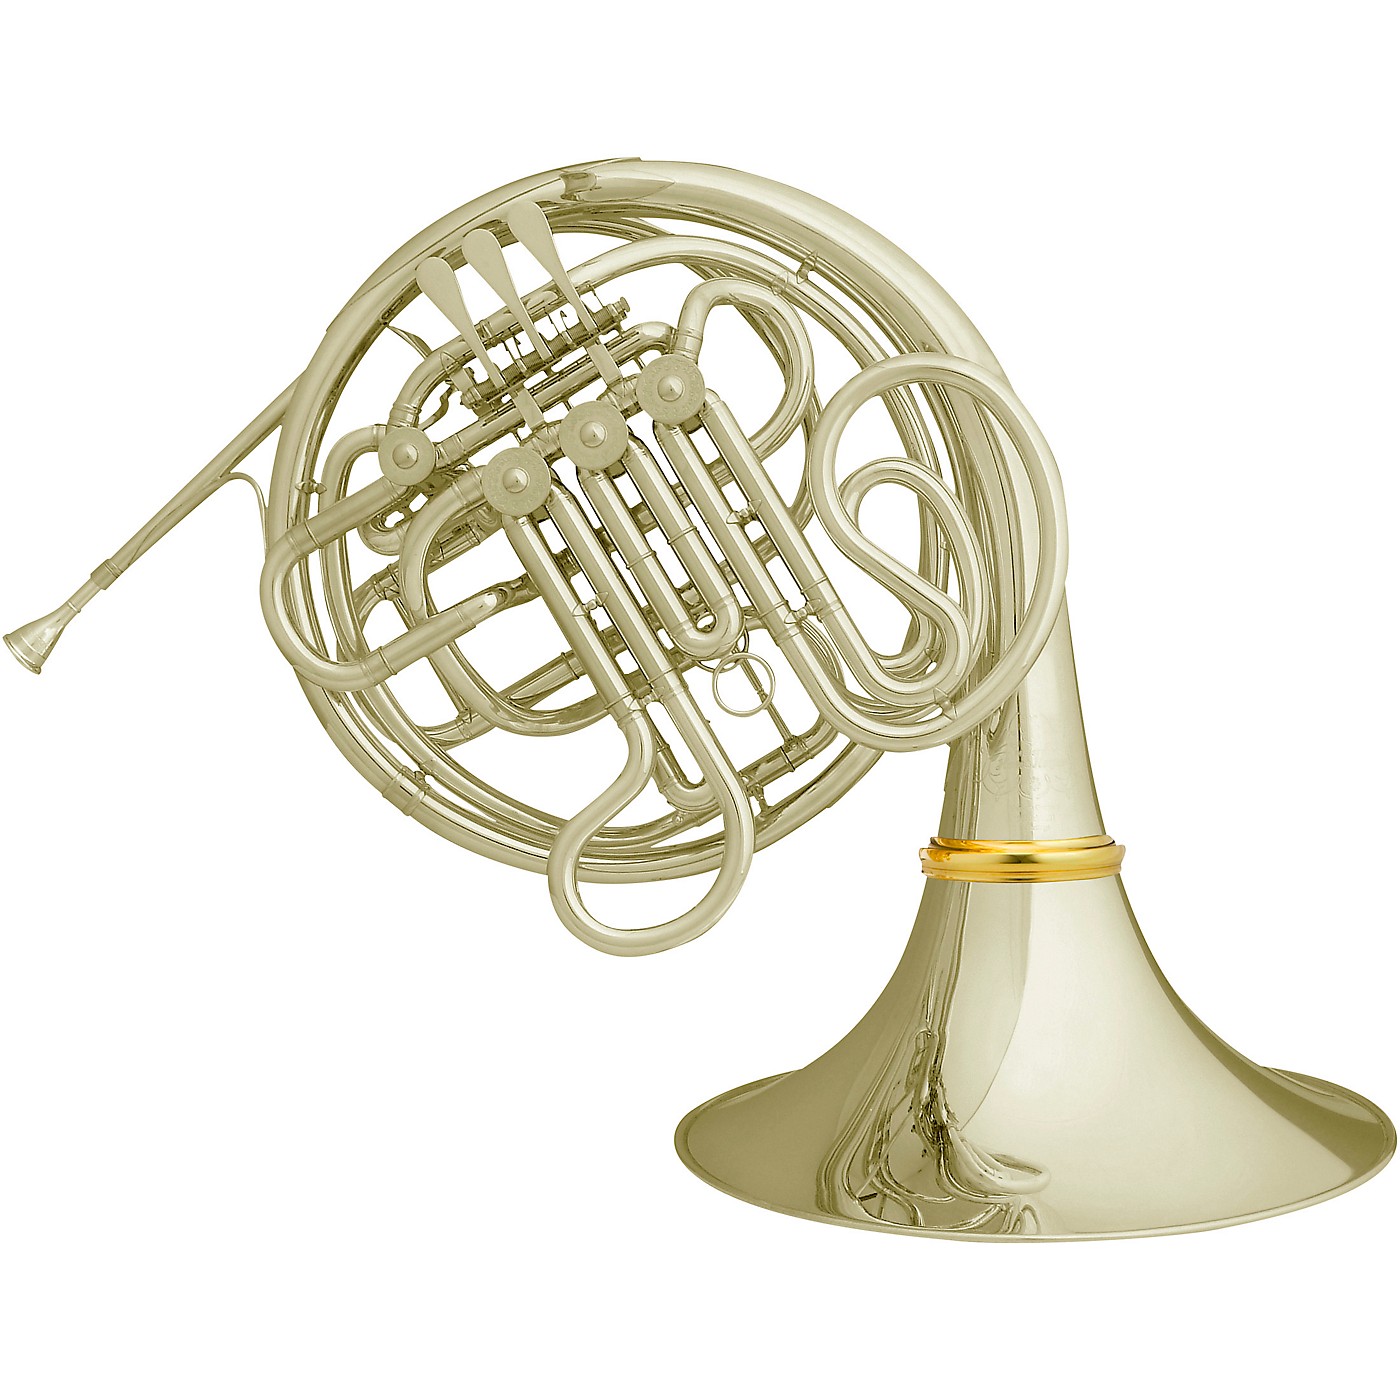 Hans Hoyer Heritage 6801 Bb/F Double French Horn Detachable Bell thumbnail